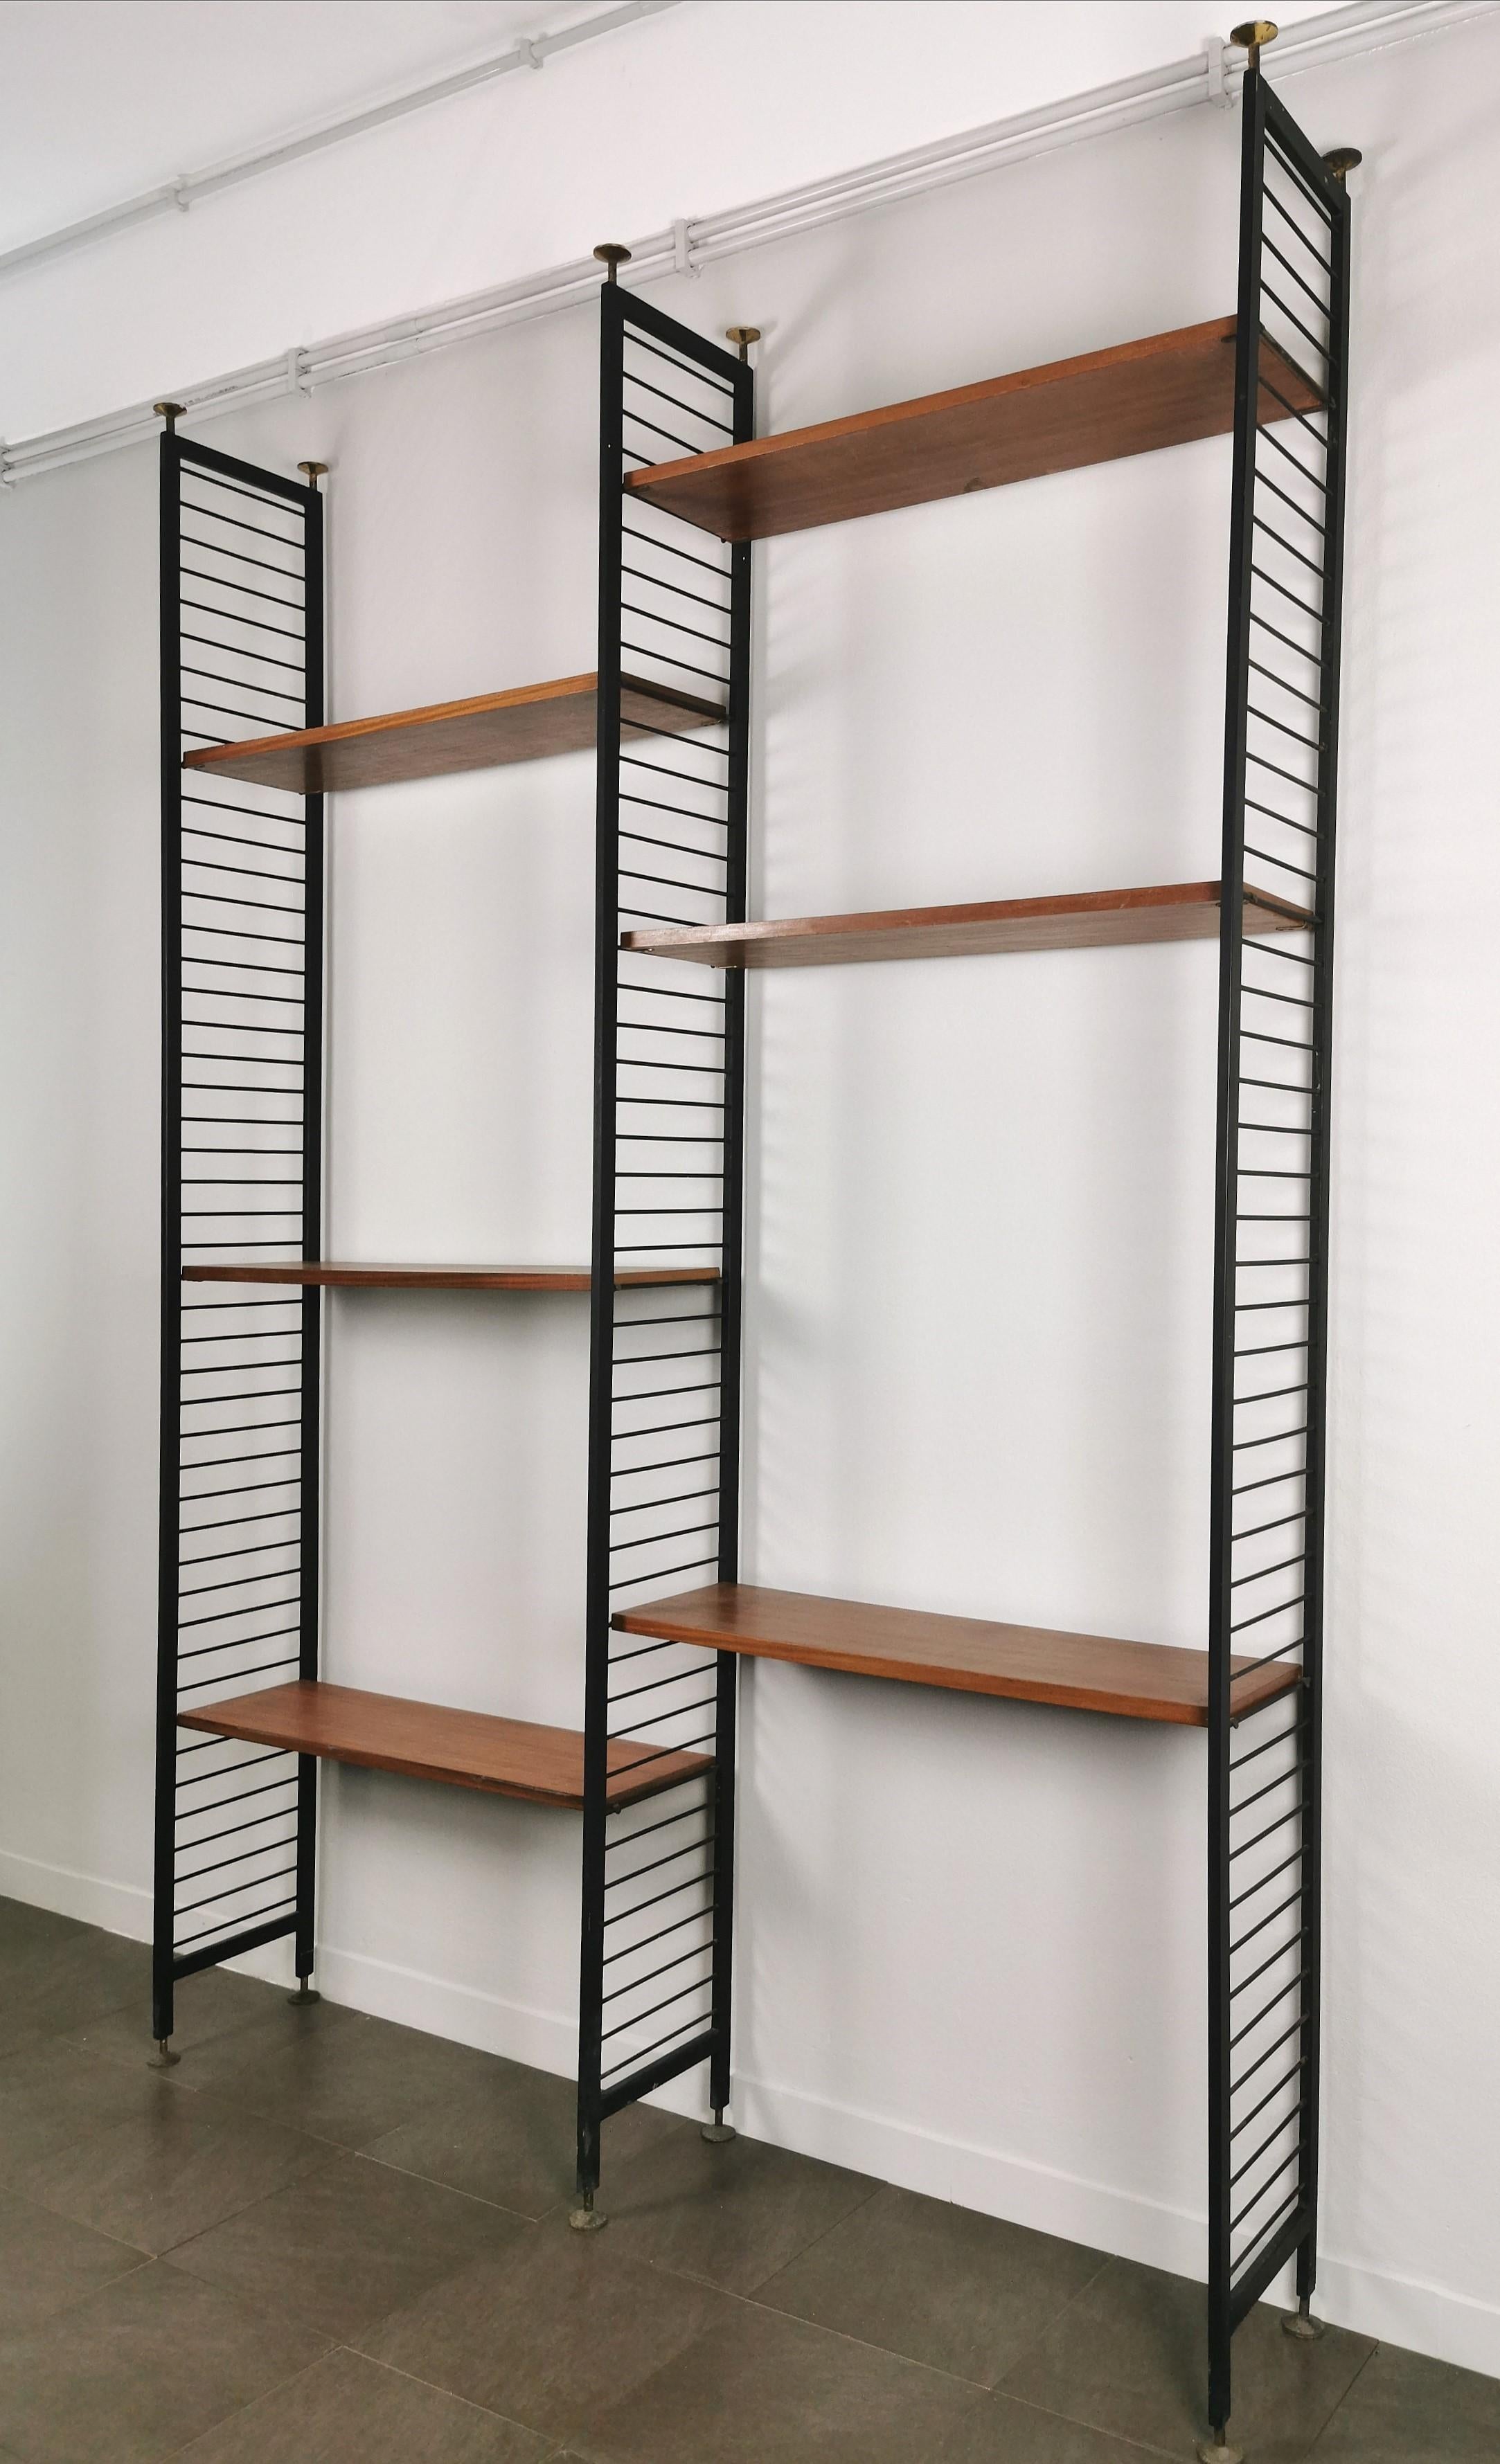 Modular wall bookcase produced in Italy in the 60s. The bookcase was made with 3 black enamelled metal uprights, adjustable brass feet and 6 wooden shelves that can be positioned according to your needs.




Total weight of the 3 uprights: 27